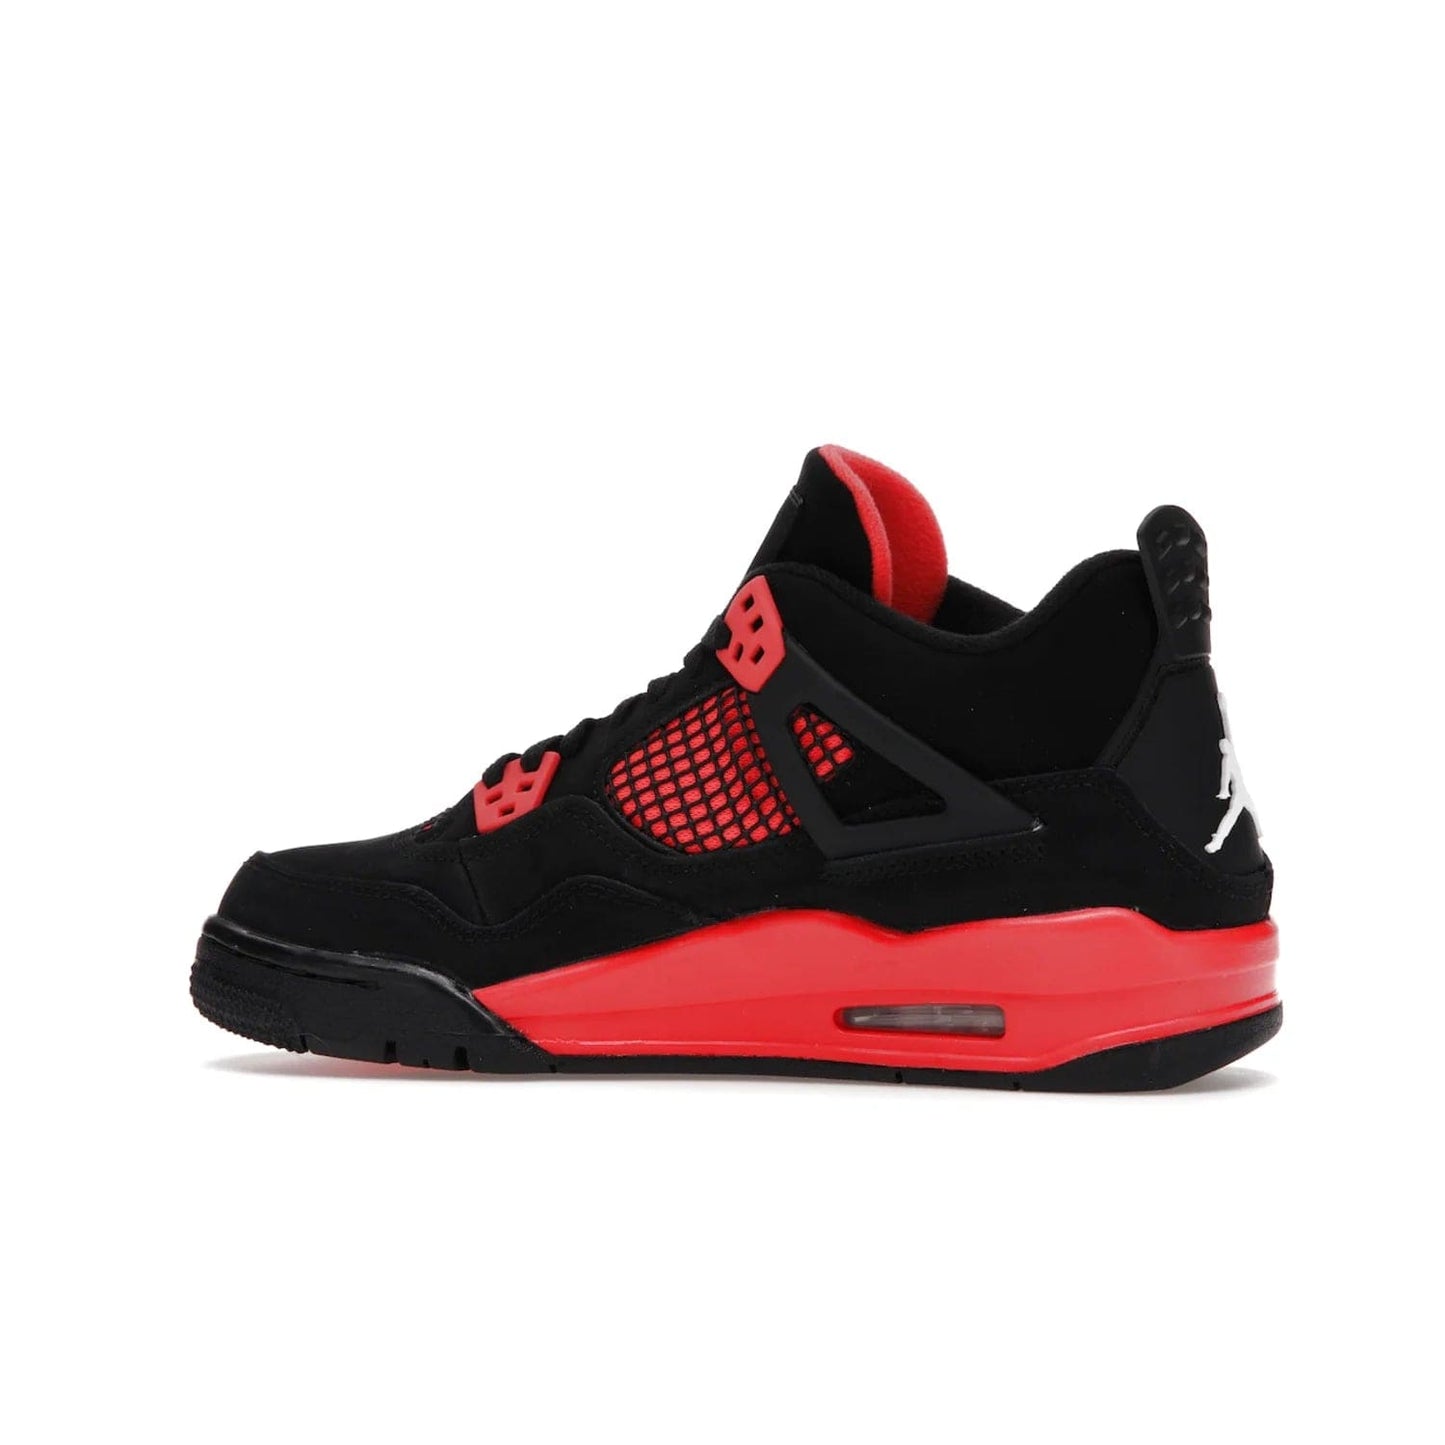 Jordan 4 Retro Red Thunder (GS) - Image 21 - Only at www.BallersClubKickz.com - The Air Jordan 4 Retro Red Thunder GS features a stylish black and crimson upper with a Jumpman logo. Athletic midsole with Air bubbles for cushioning and black rubber outsole with iconic motif complete this classic sneaker.